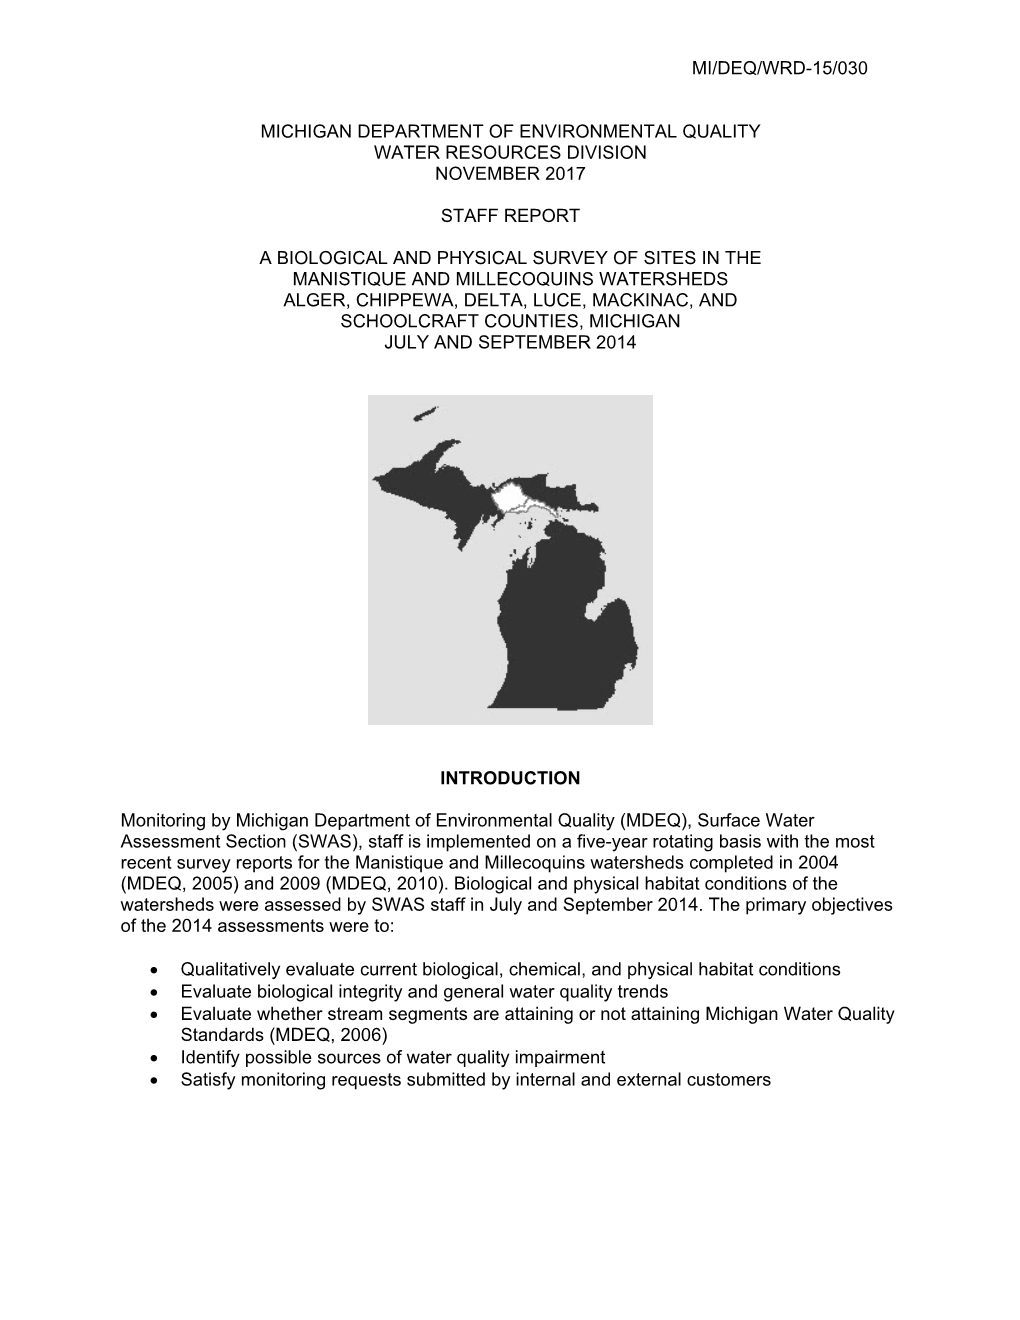 A Biological and Physical Survey of Sites in the Manistique And